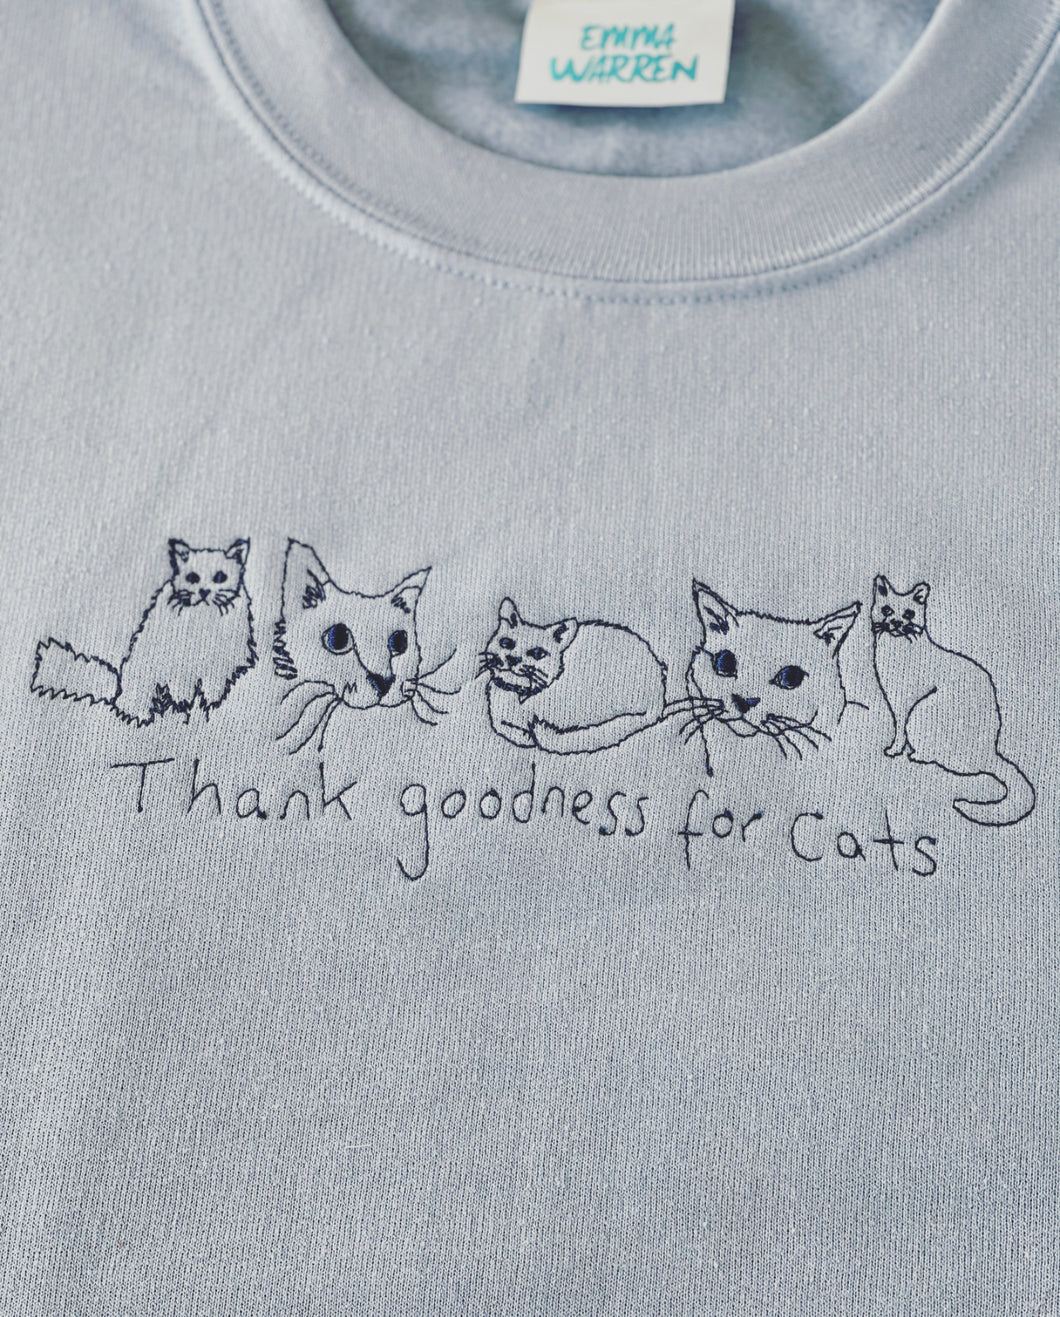 Thank goodness for cats embroidered sweater